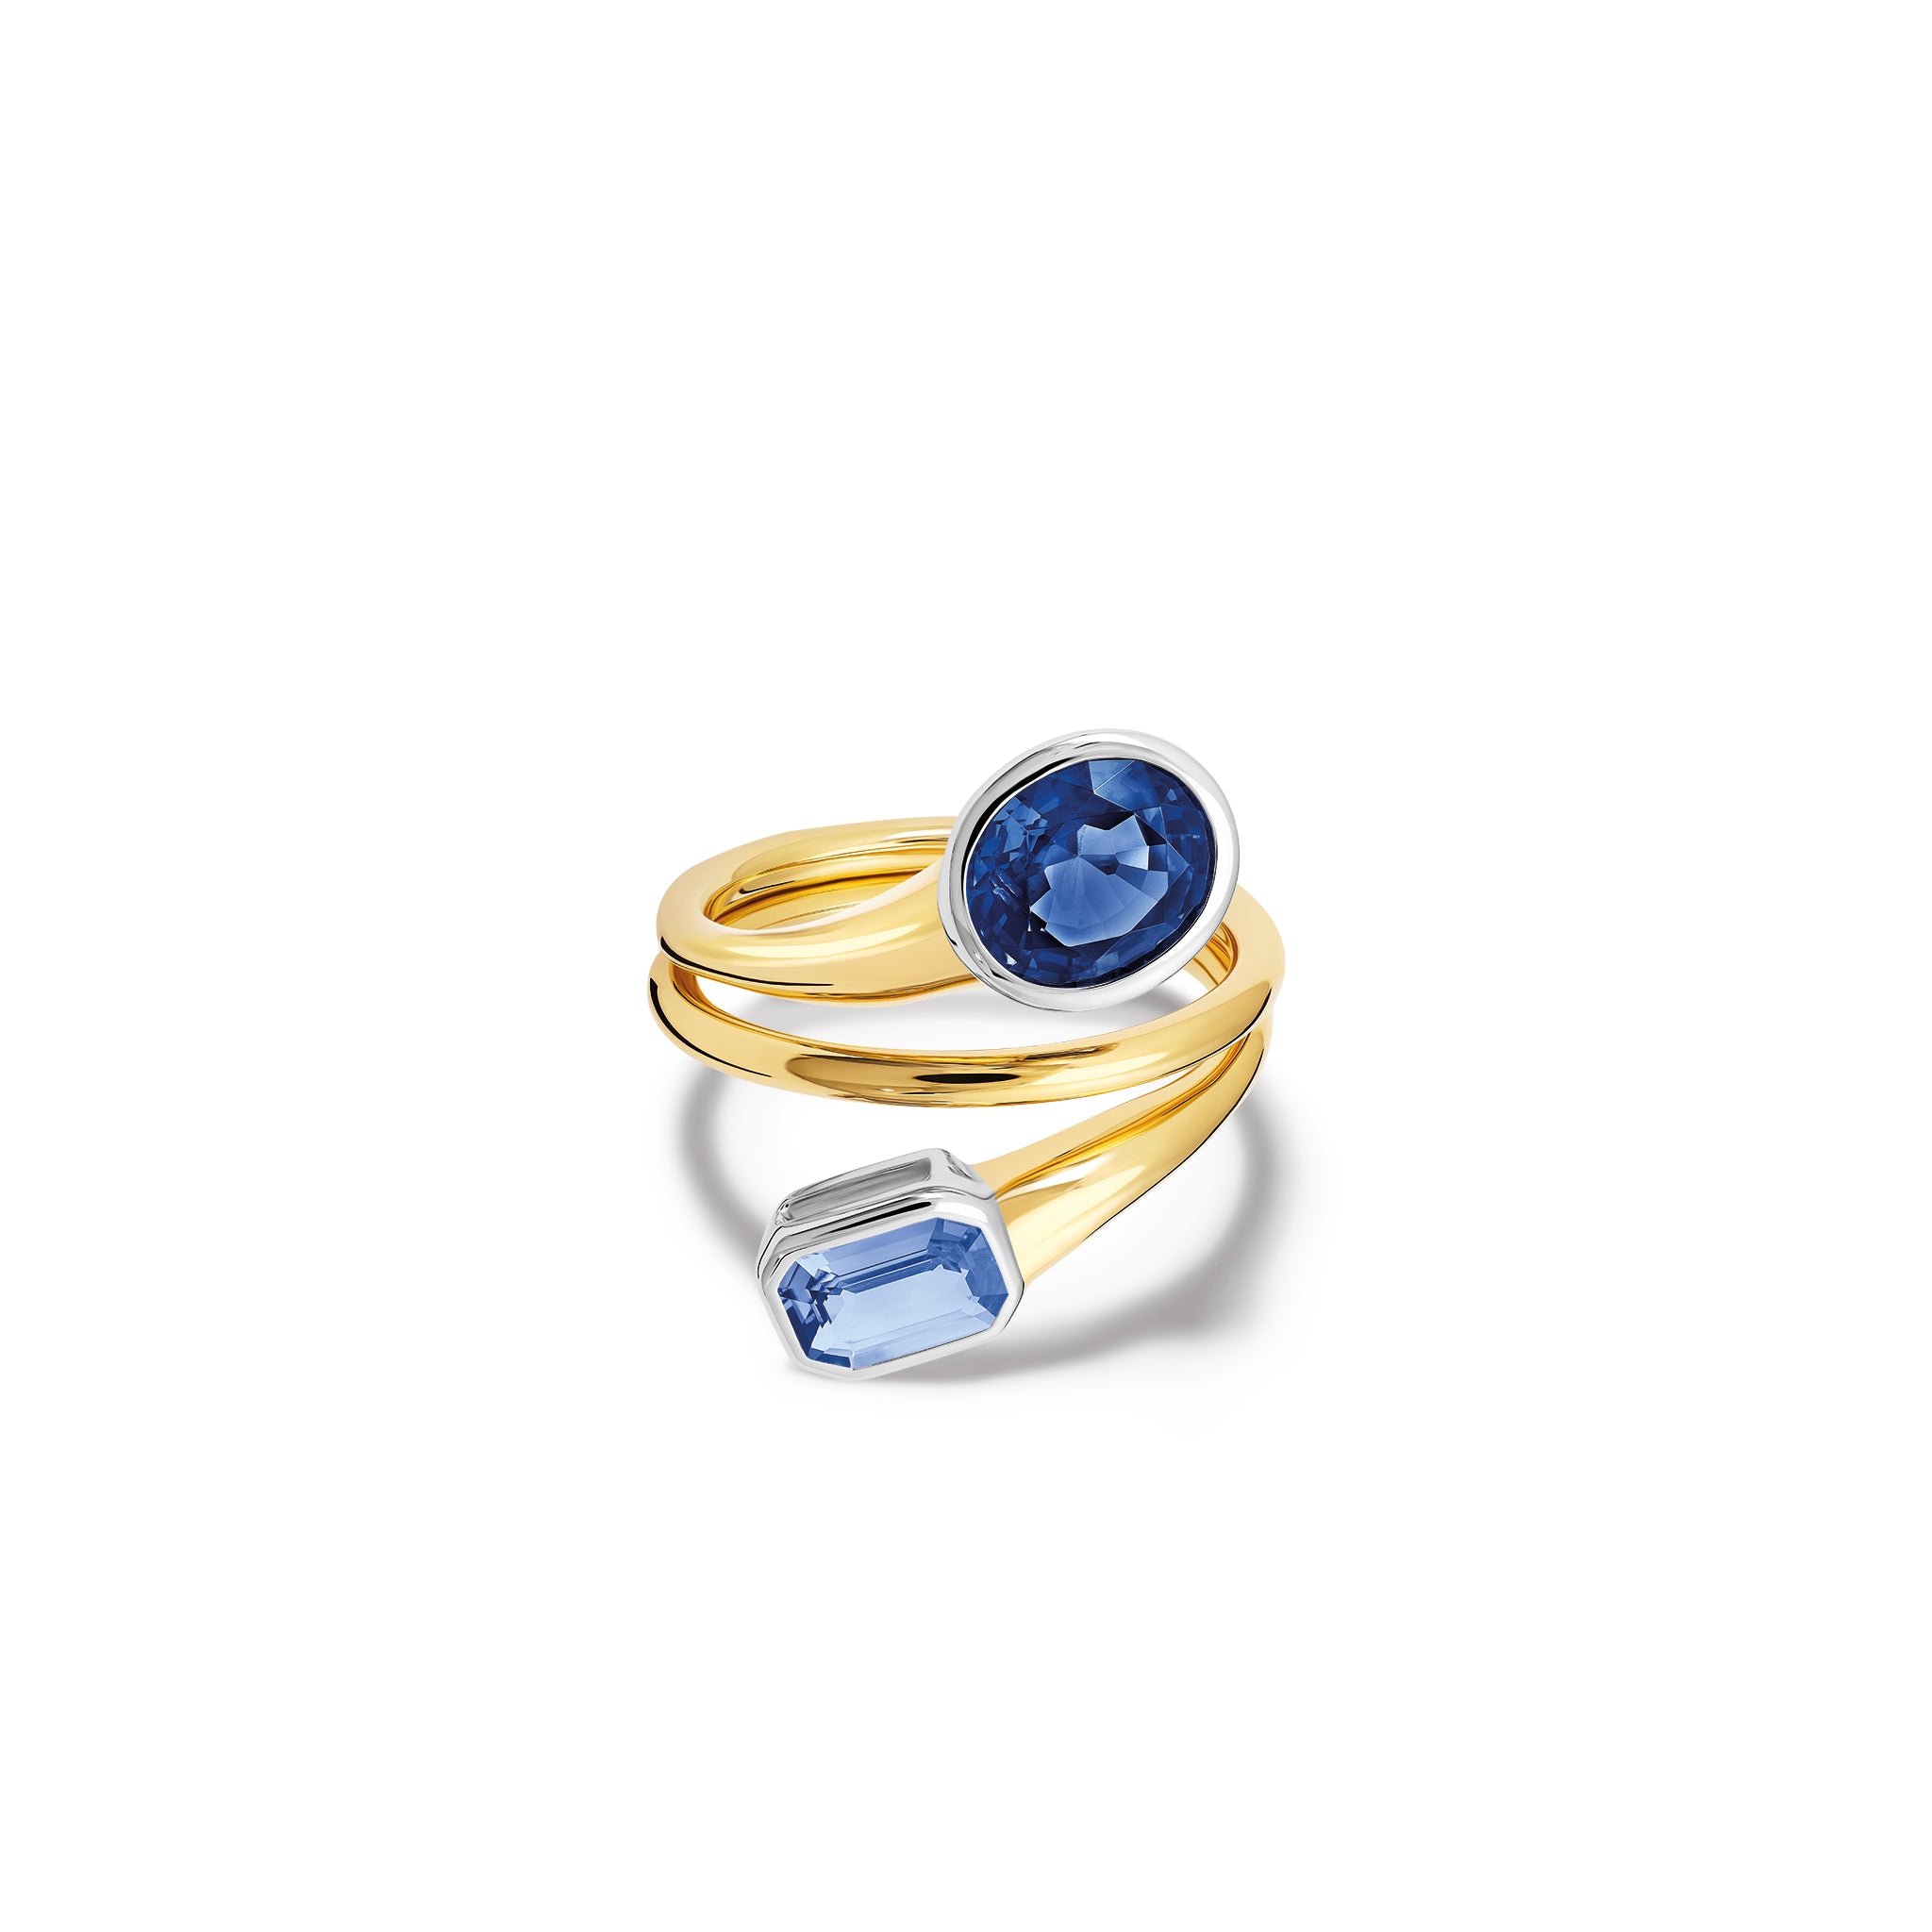 Nicoline Ring 18ct Yellow & White Gold - Blue Spinel & Sapphire